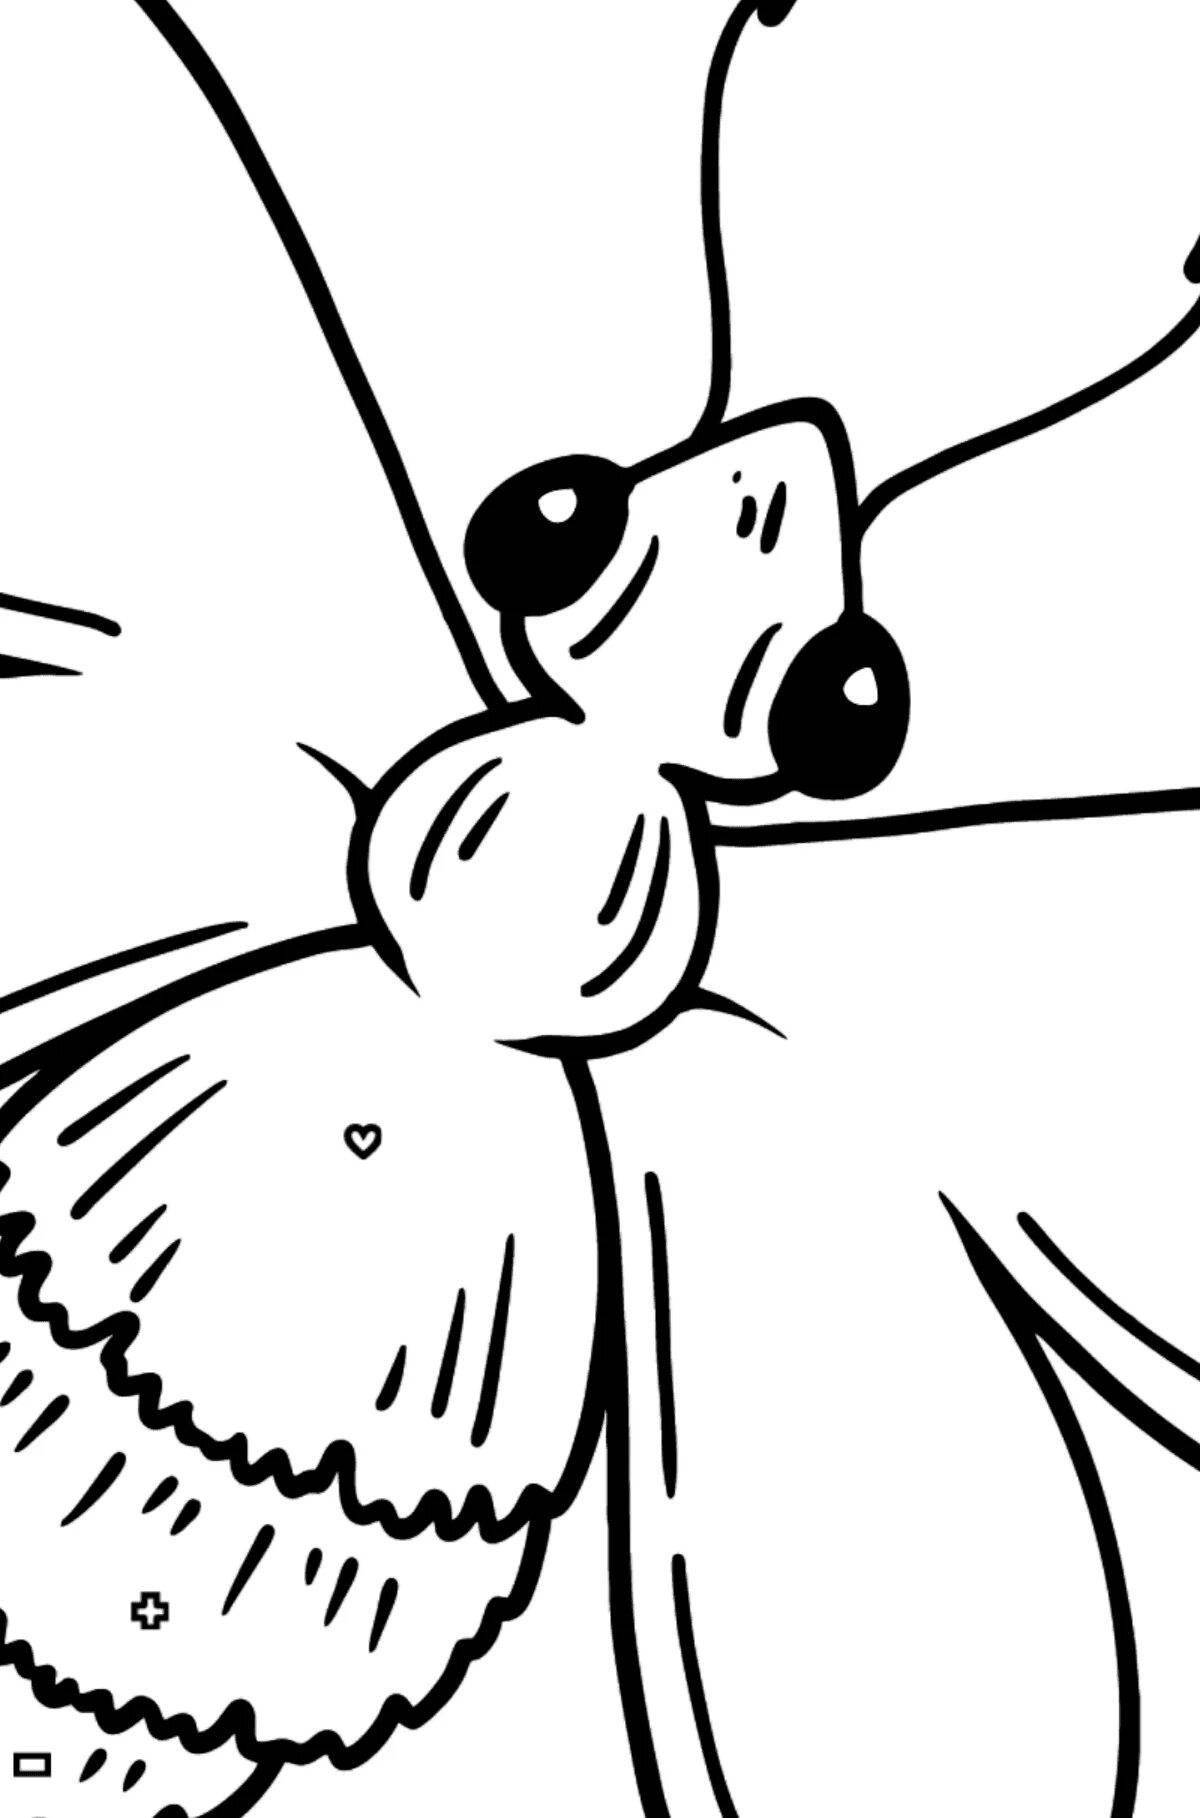 Fancy cat and bee coloring book